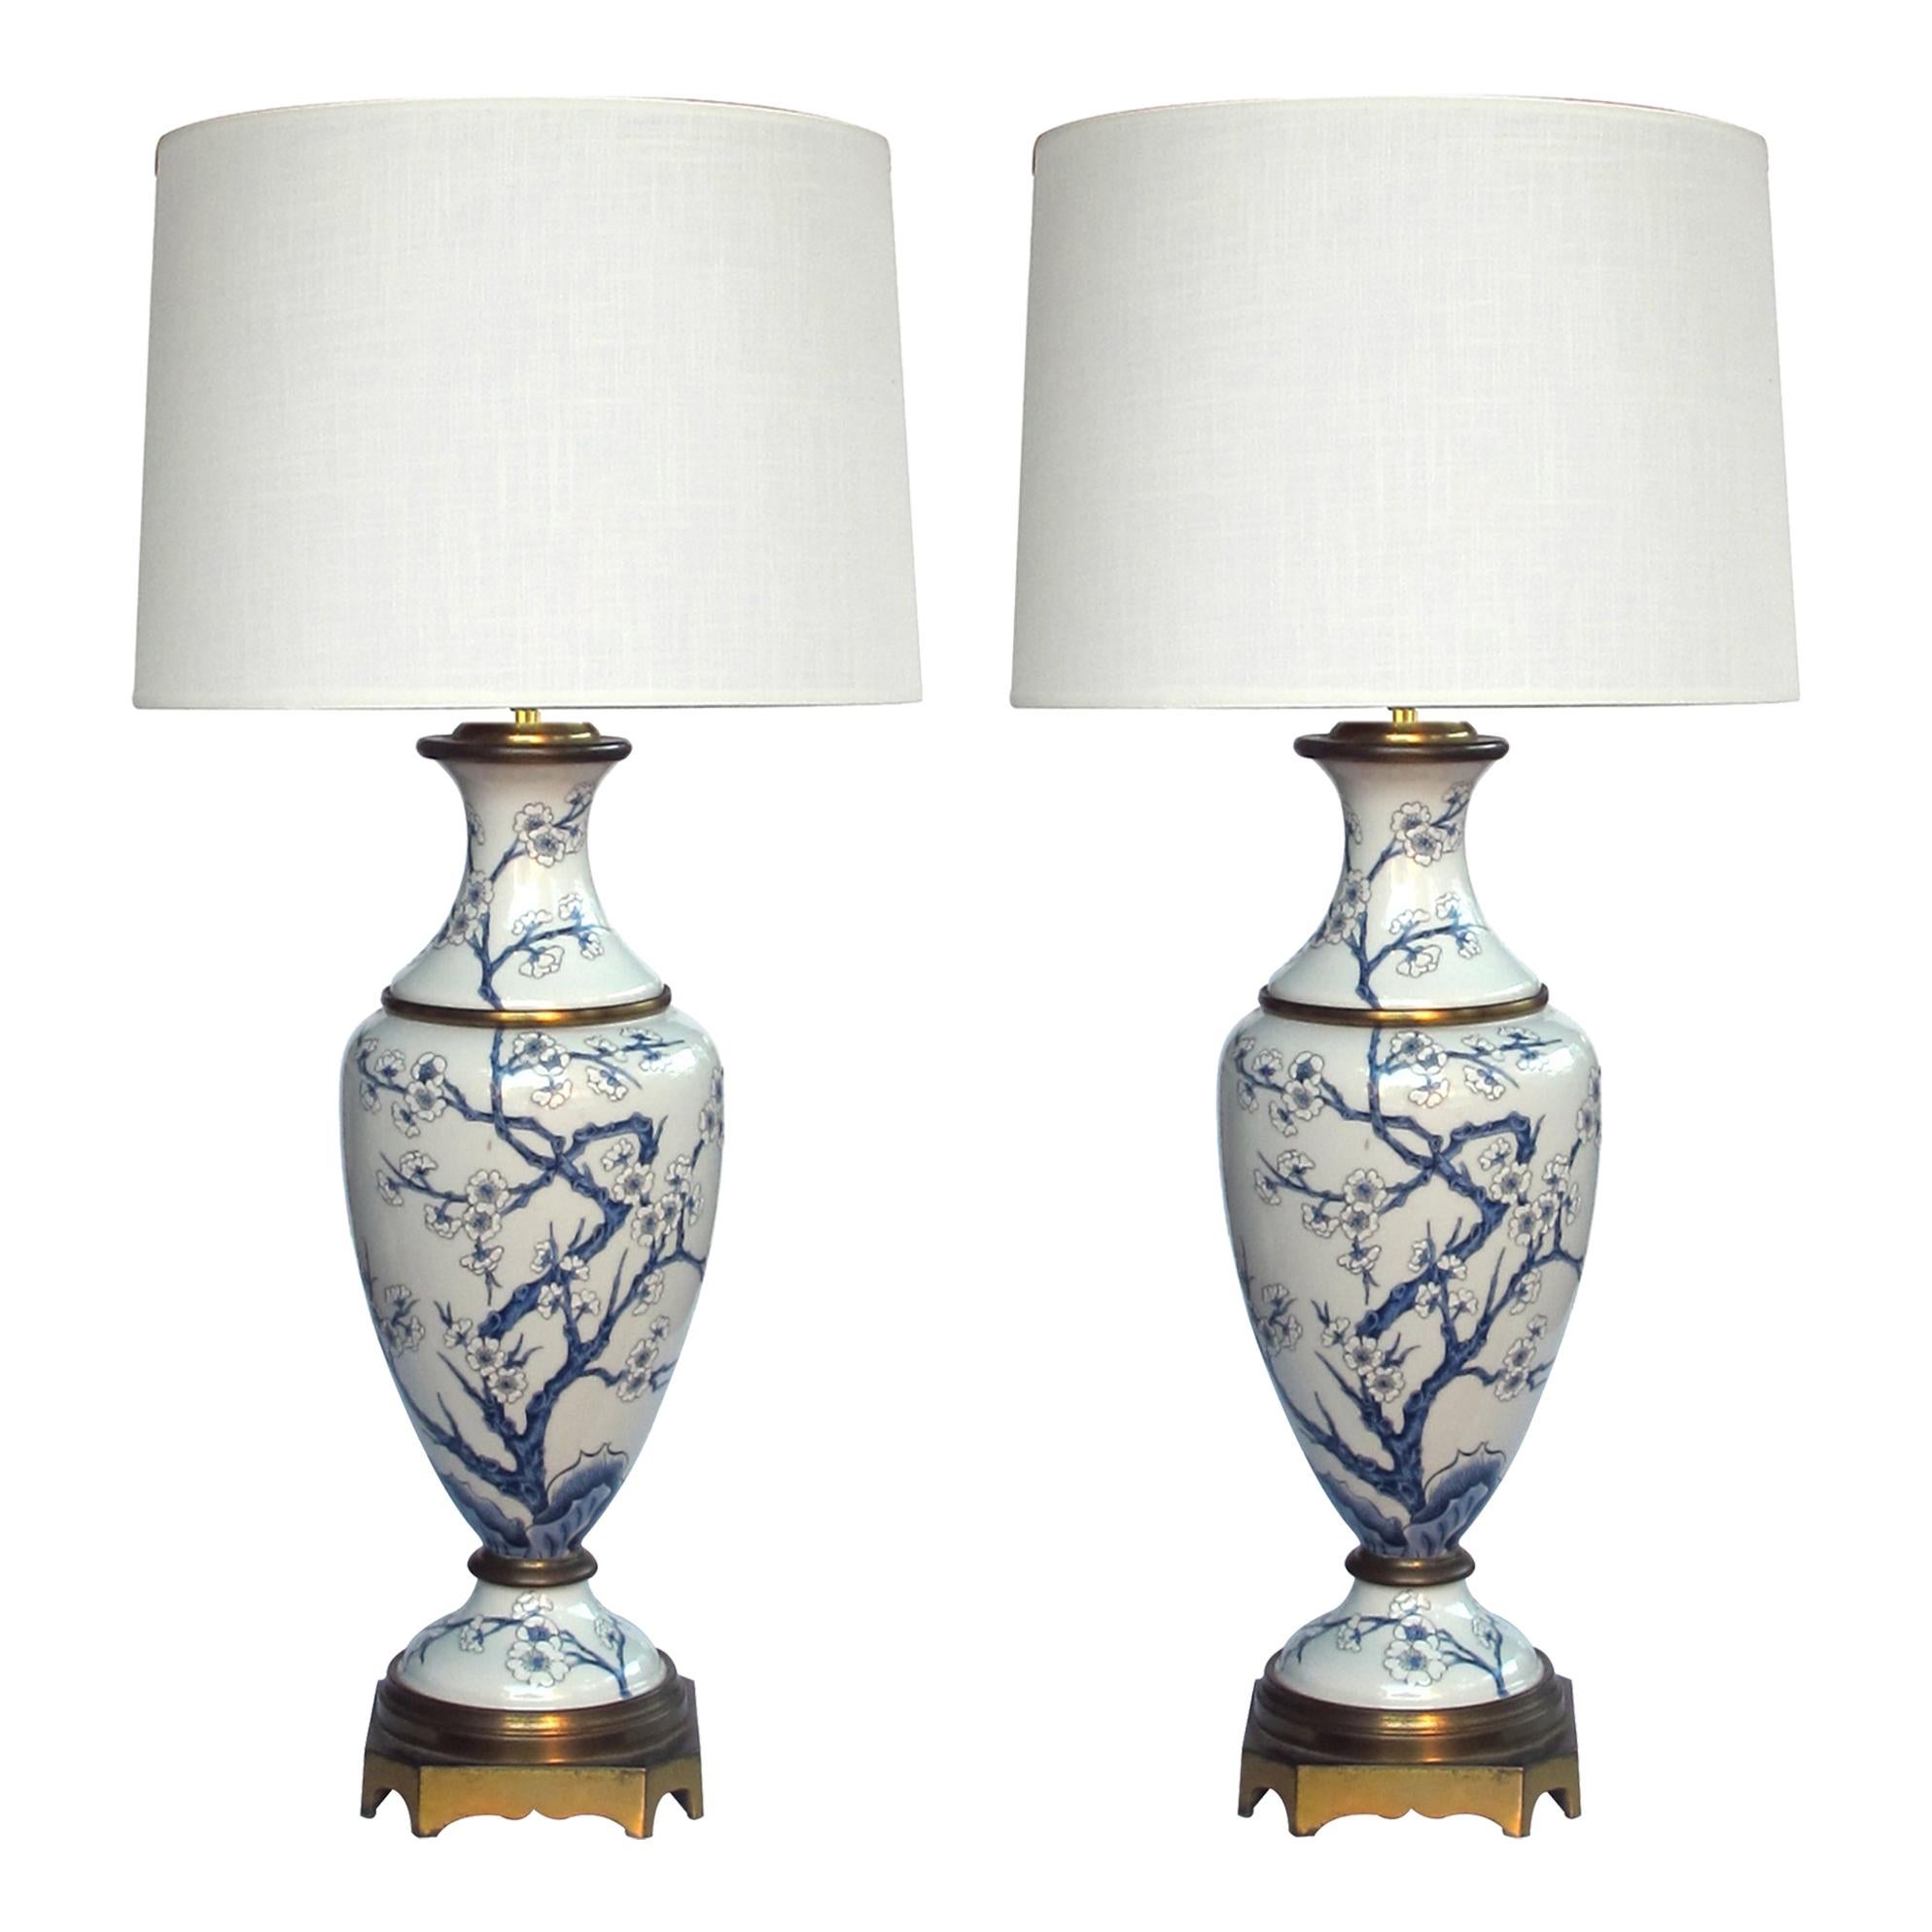 Pair of Paris Porcelain Blue and White Hand Painted Baluster-Form Lamps